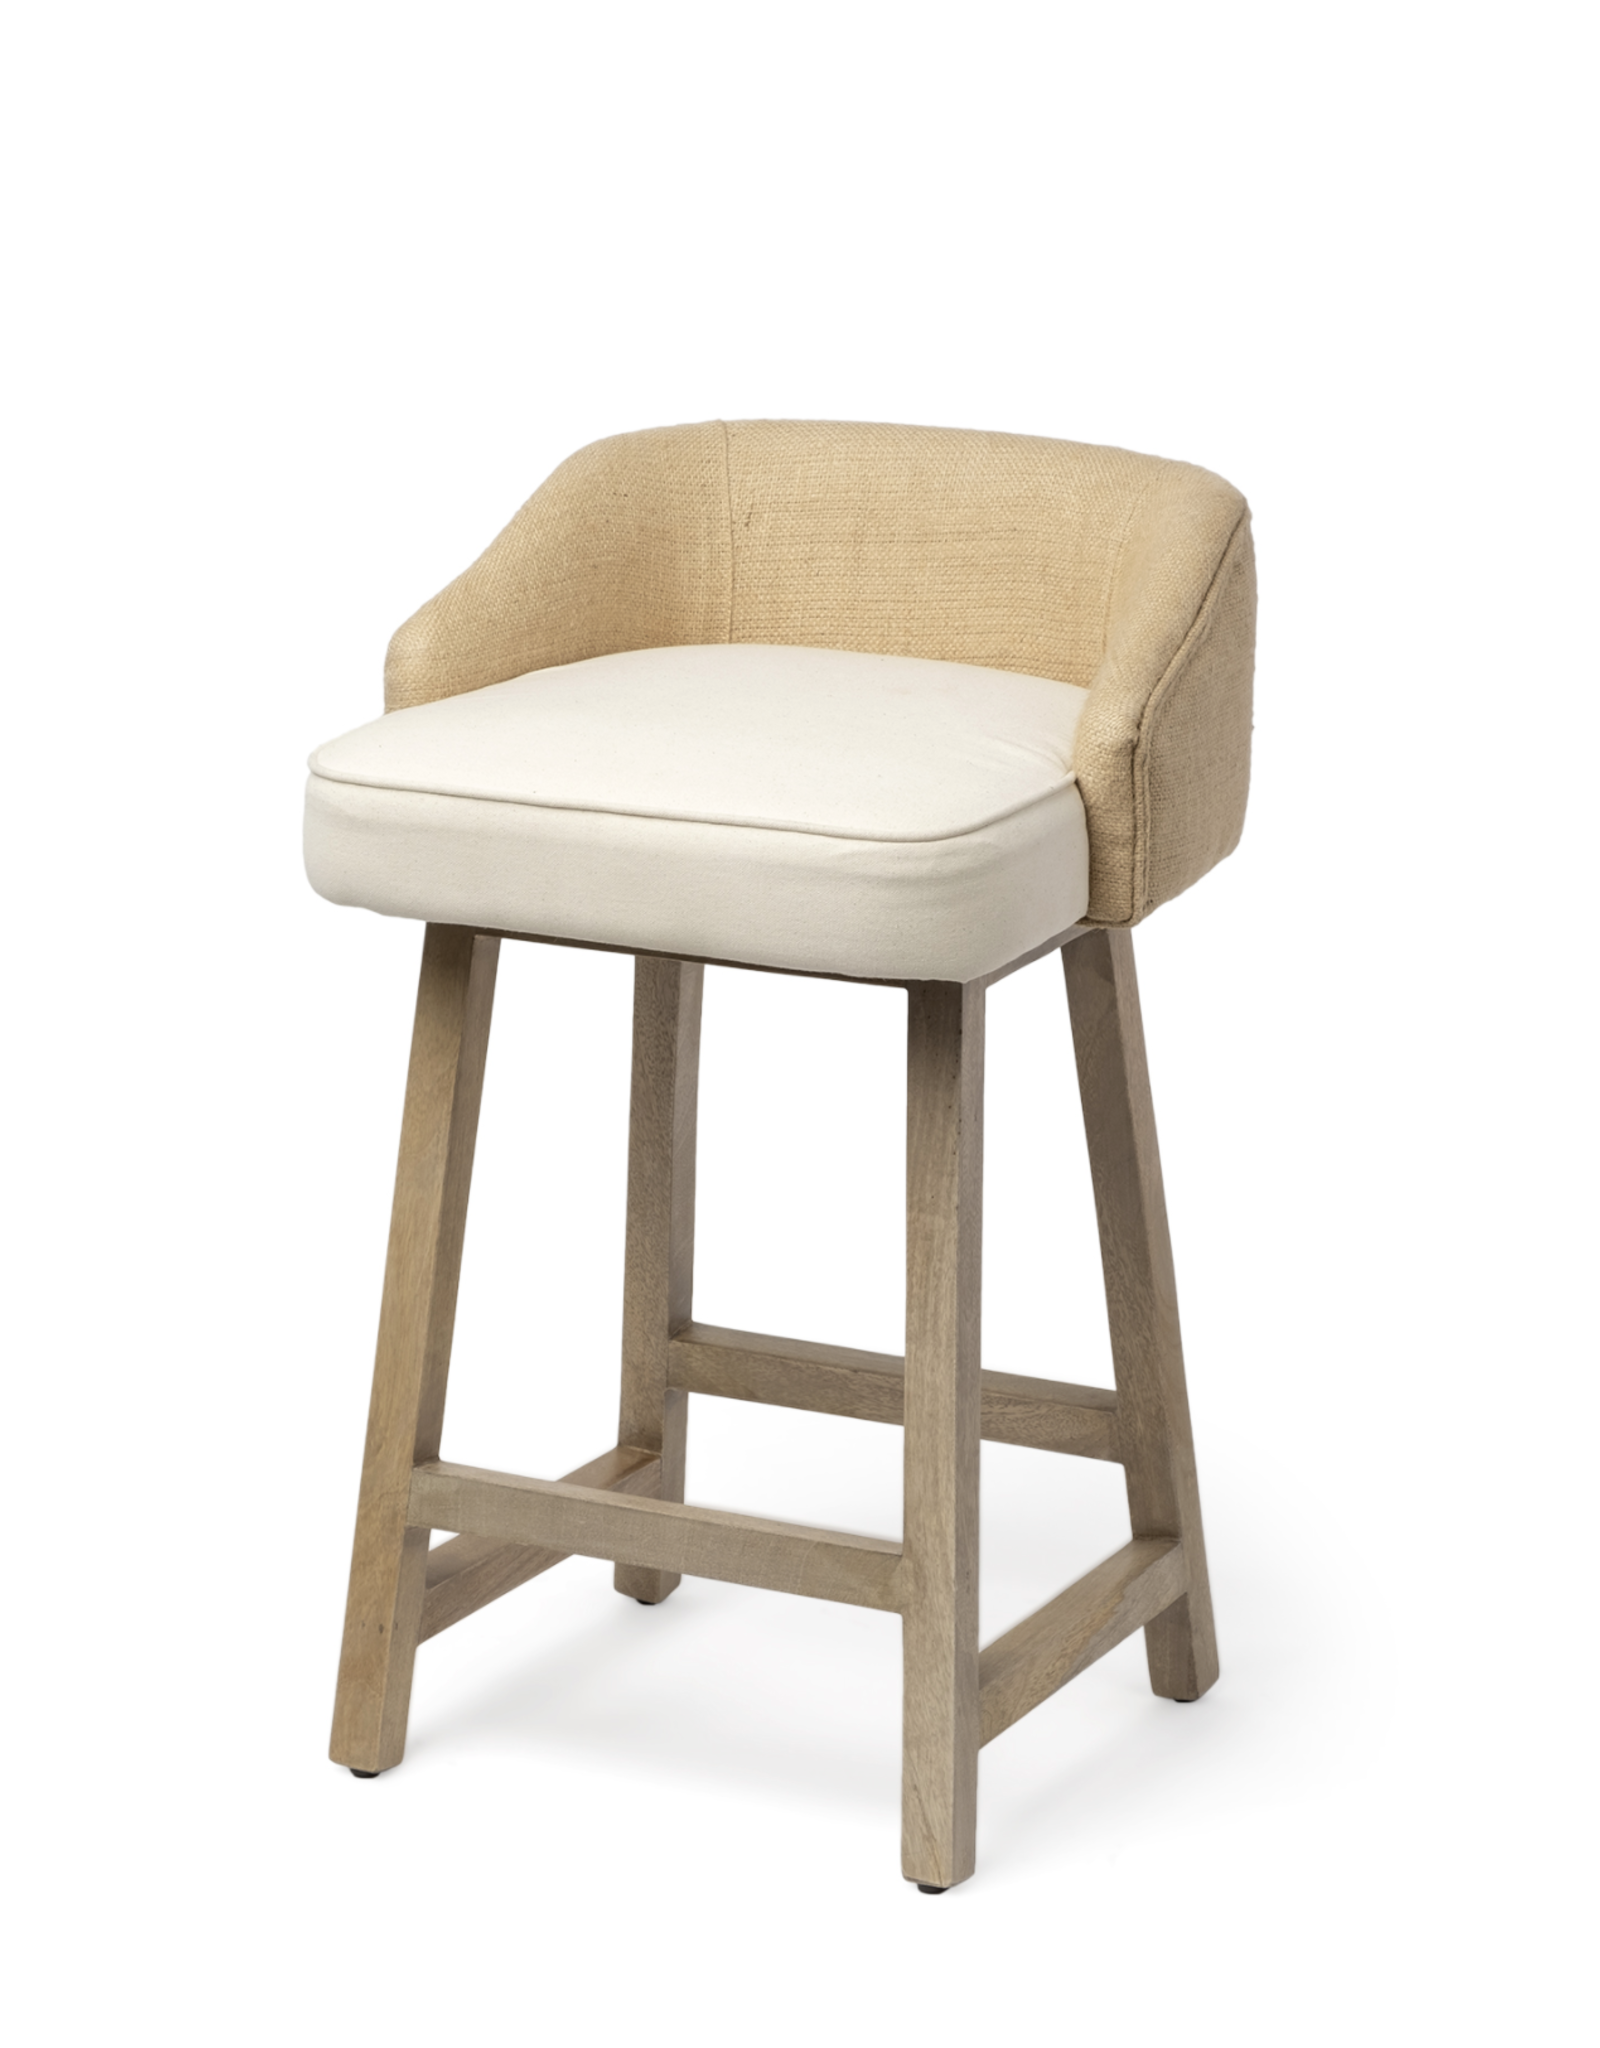 Monmouth Cream/Beige Fabric Seat Brown  Wood Frame Counter Stool